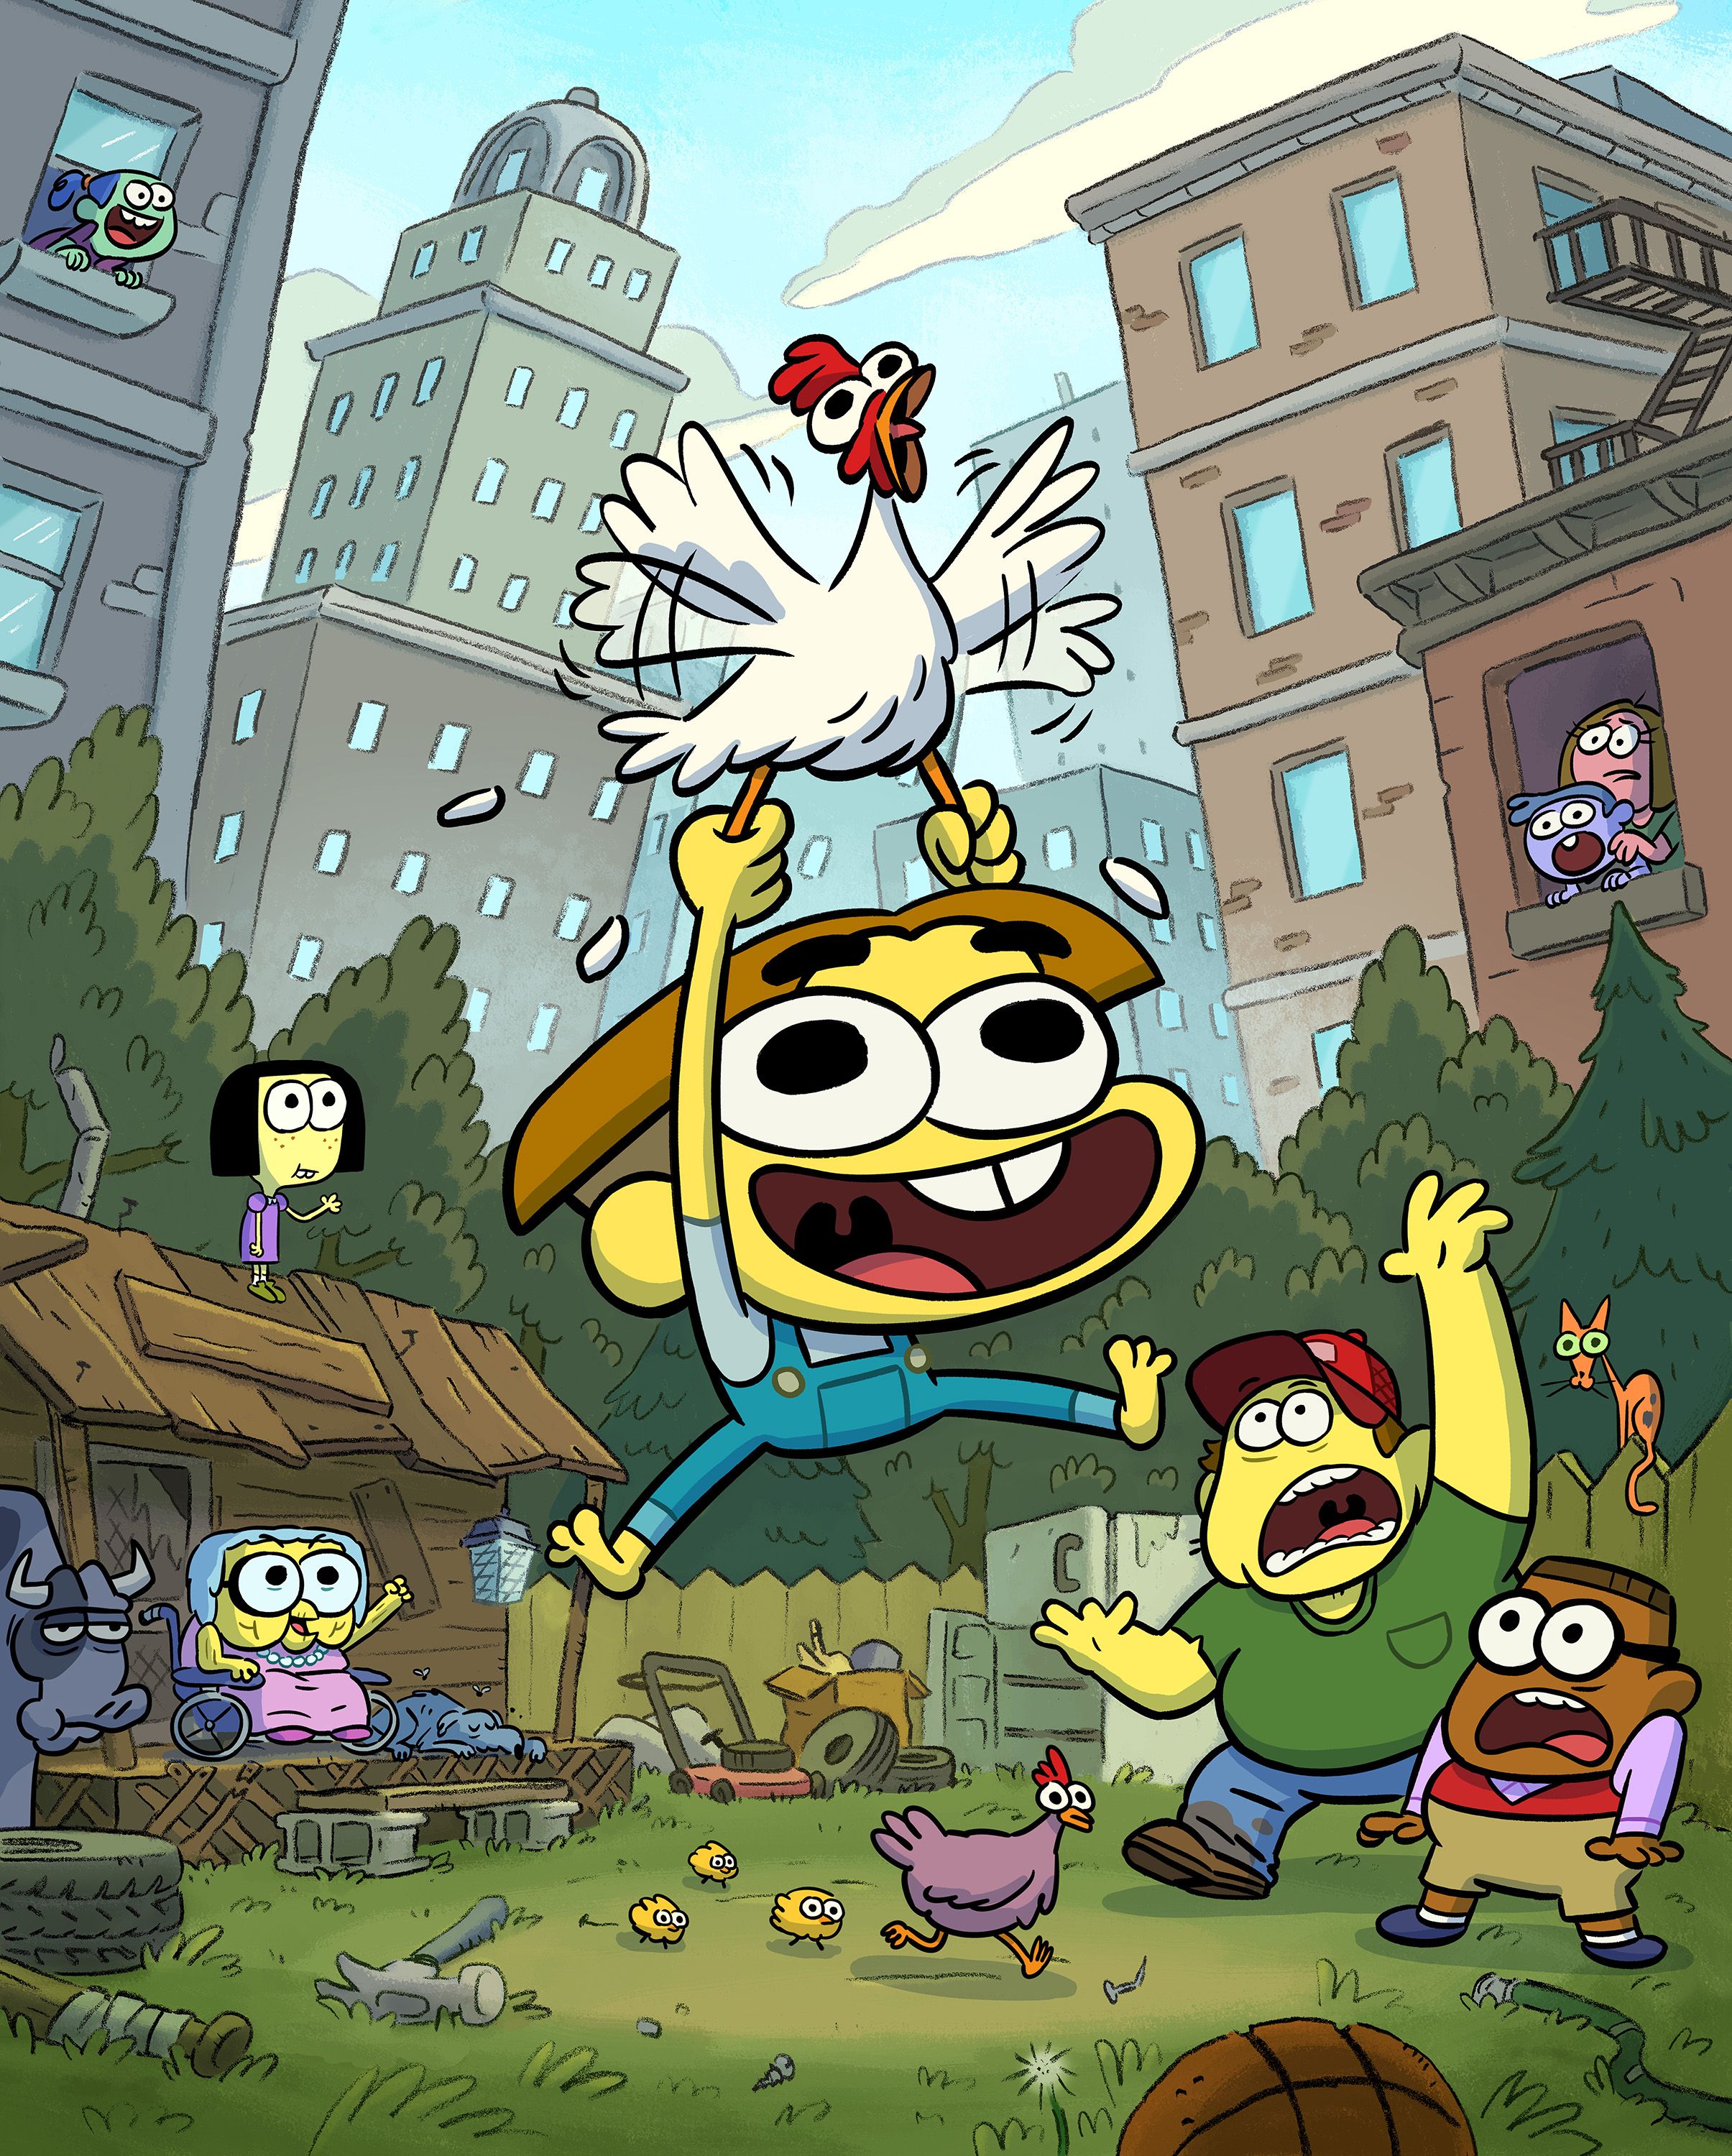 Fun Facts About Disney Channel's New Show Big City Greens